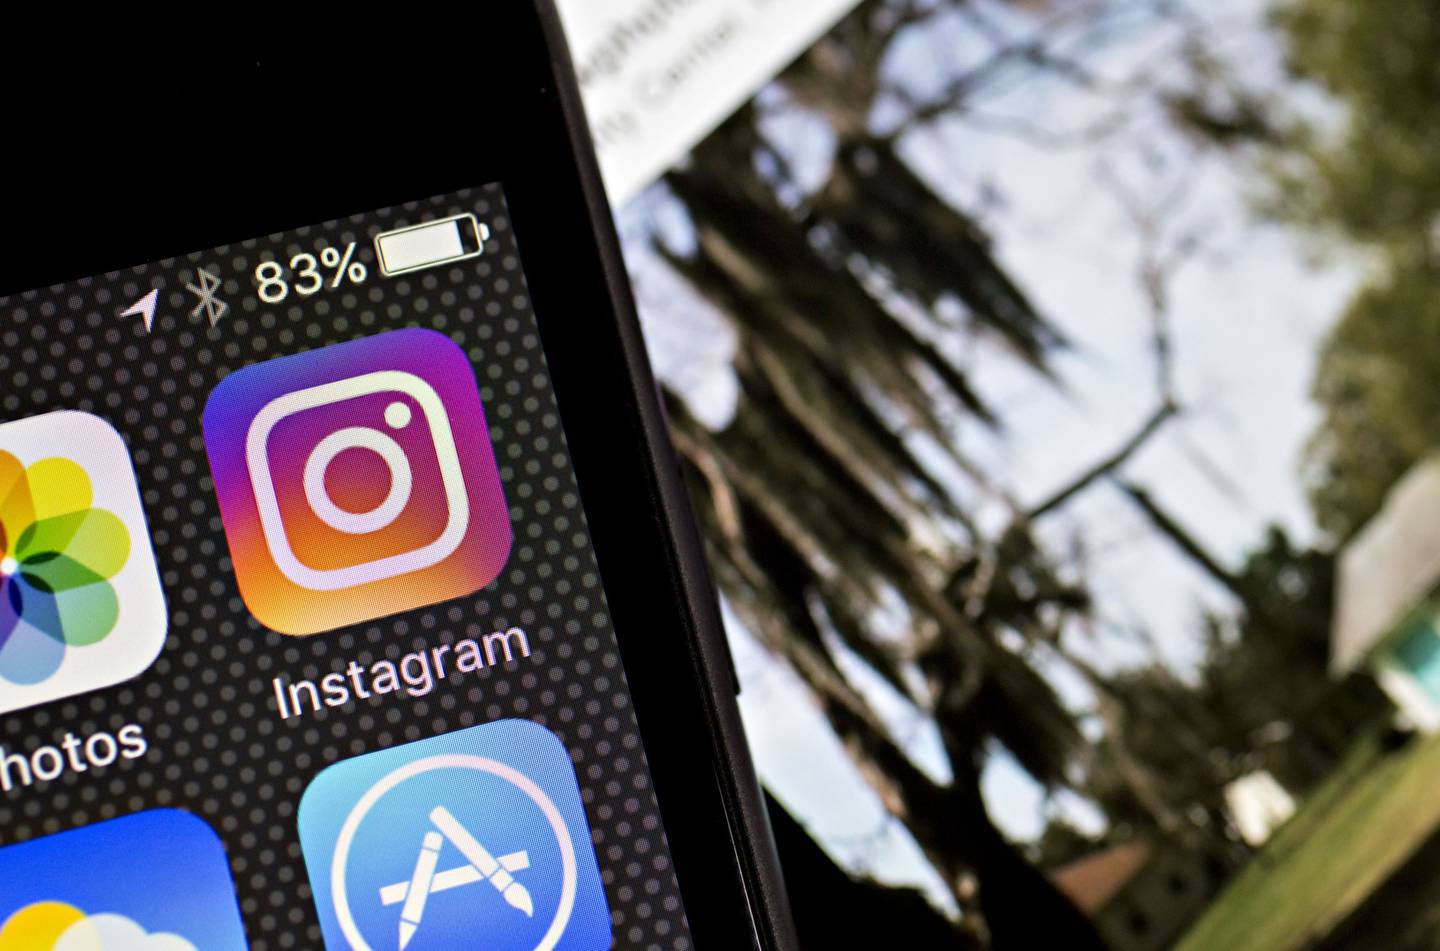 Facebook Inc.'s Instagram logo is displayed on an Apple Inc. iPhone in this arranged photograph taken in Washington, D.C., U.S., on Friday, June 17, 2016. In a bid to give its users an incentive to create more content for the photo and video-sharing site, Facebook's Instagram is considering sharing revenue generated from news, sports, celebrities and other content said Carolyn Everson, vice president for global marketing solutions at Facebook. Photographer: Andrew Harrer/Bloomberg